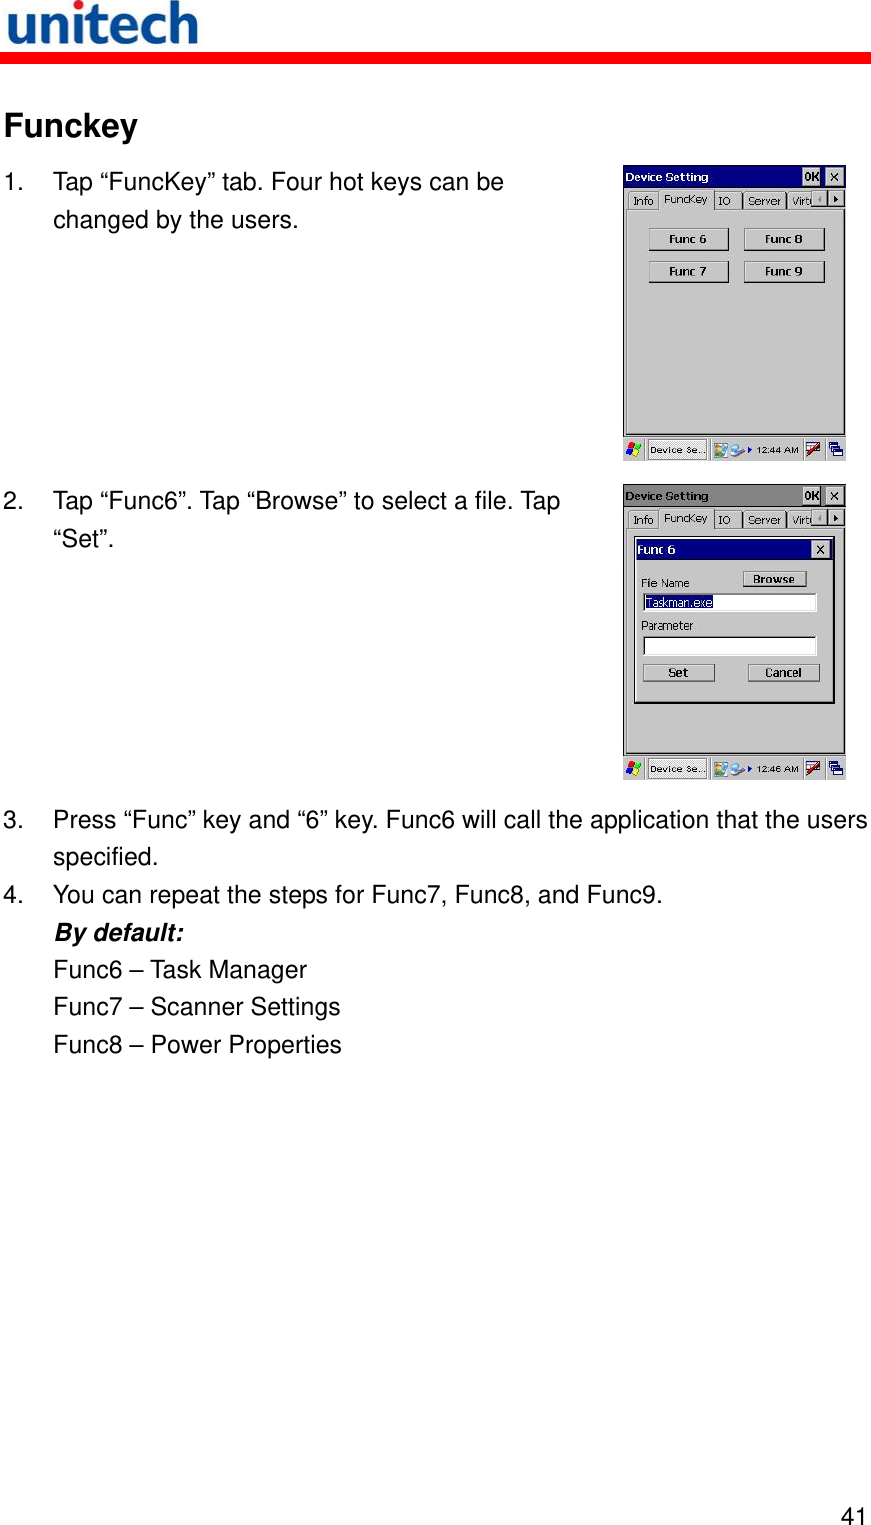   41 Funckey 1.  Tap “FuncKey” tab. Four hot keys can be changed by the users.  2.  Tap “Func6”. Tap “Browse” to select a file. Tap “Set”.  3.  Press “Func” key and “6” key. Func6 will call the application that the users specified. 4.  You can repeat the steps for Func7, Func8, and Func9. By default: Func6 – Task Manager Func7 – Scanner Settings Func8 – Power Properties 